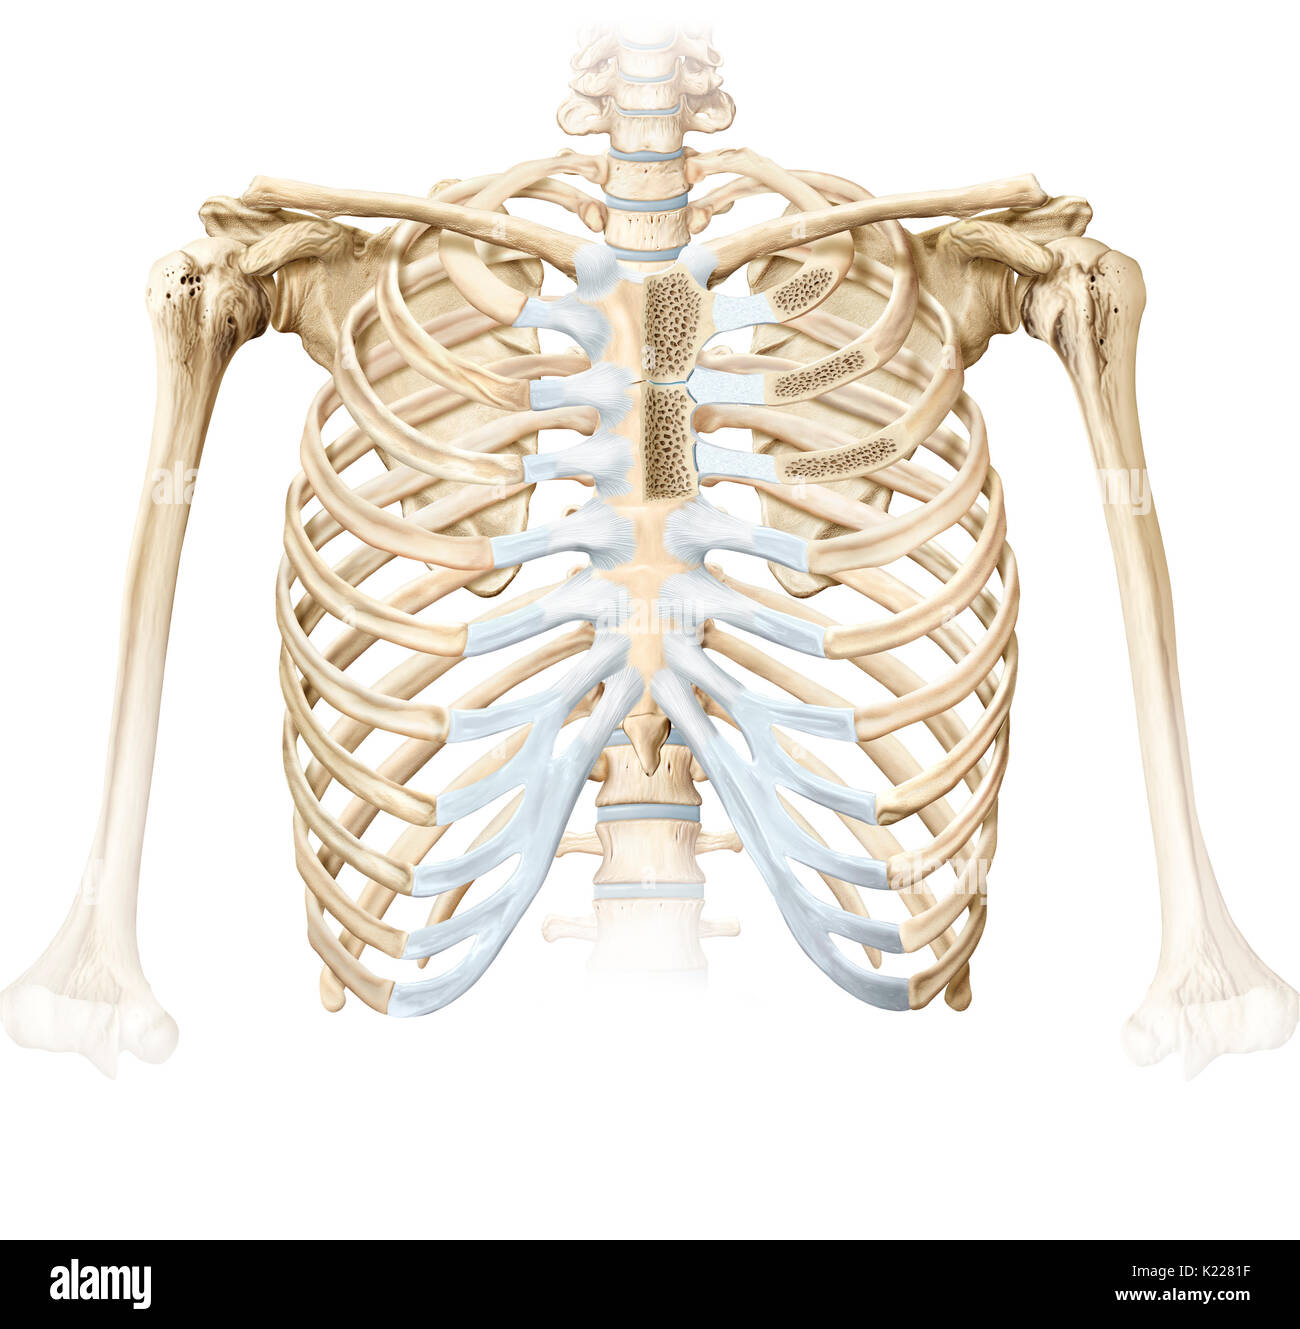 The sternocostal joints are the cartilaginous joints that connect the sternum and the ribs (other than the floating ribs). They give the thoracic cage its flexibility, especially for breathing movements. Stock Photo